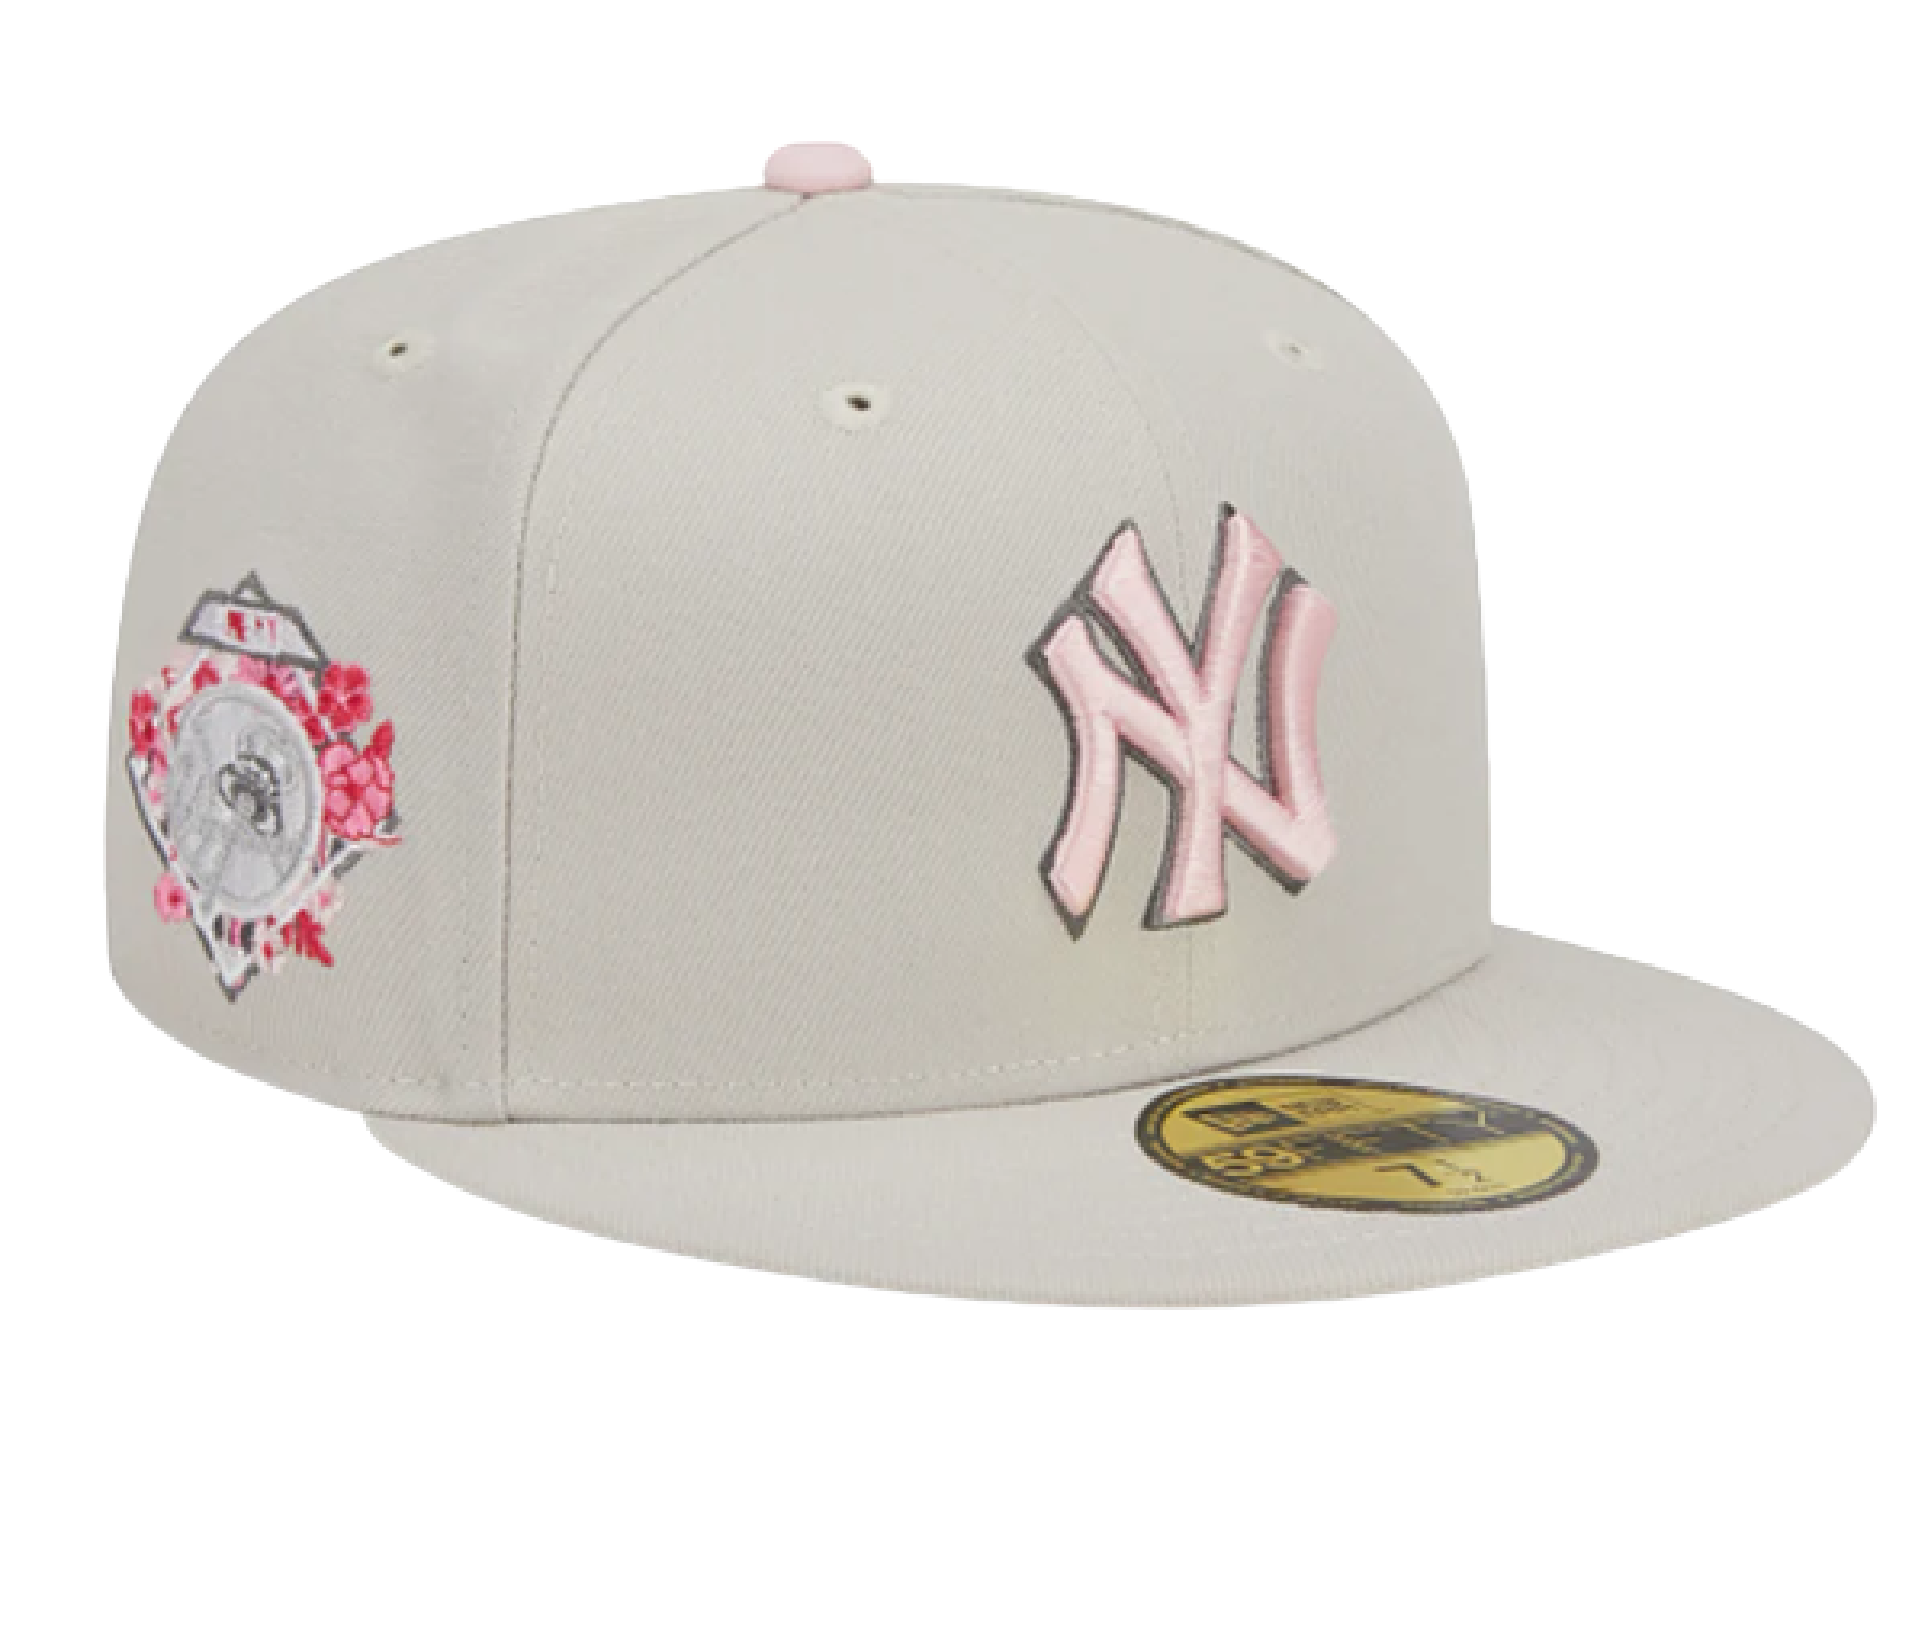 New Era New York Yankees MLB Mothers Day Side Patch59FIFTY Fitted Cap - Stone